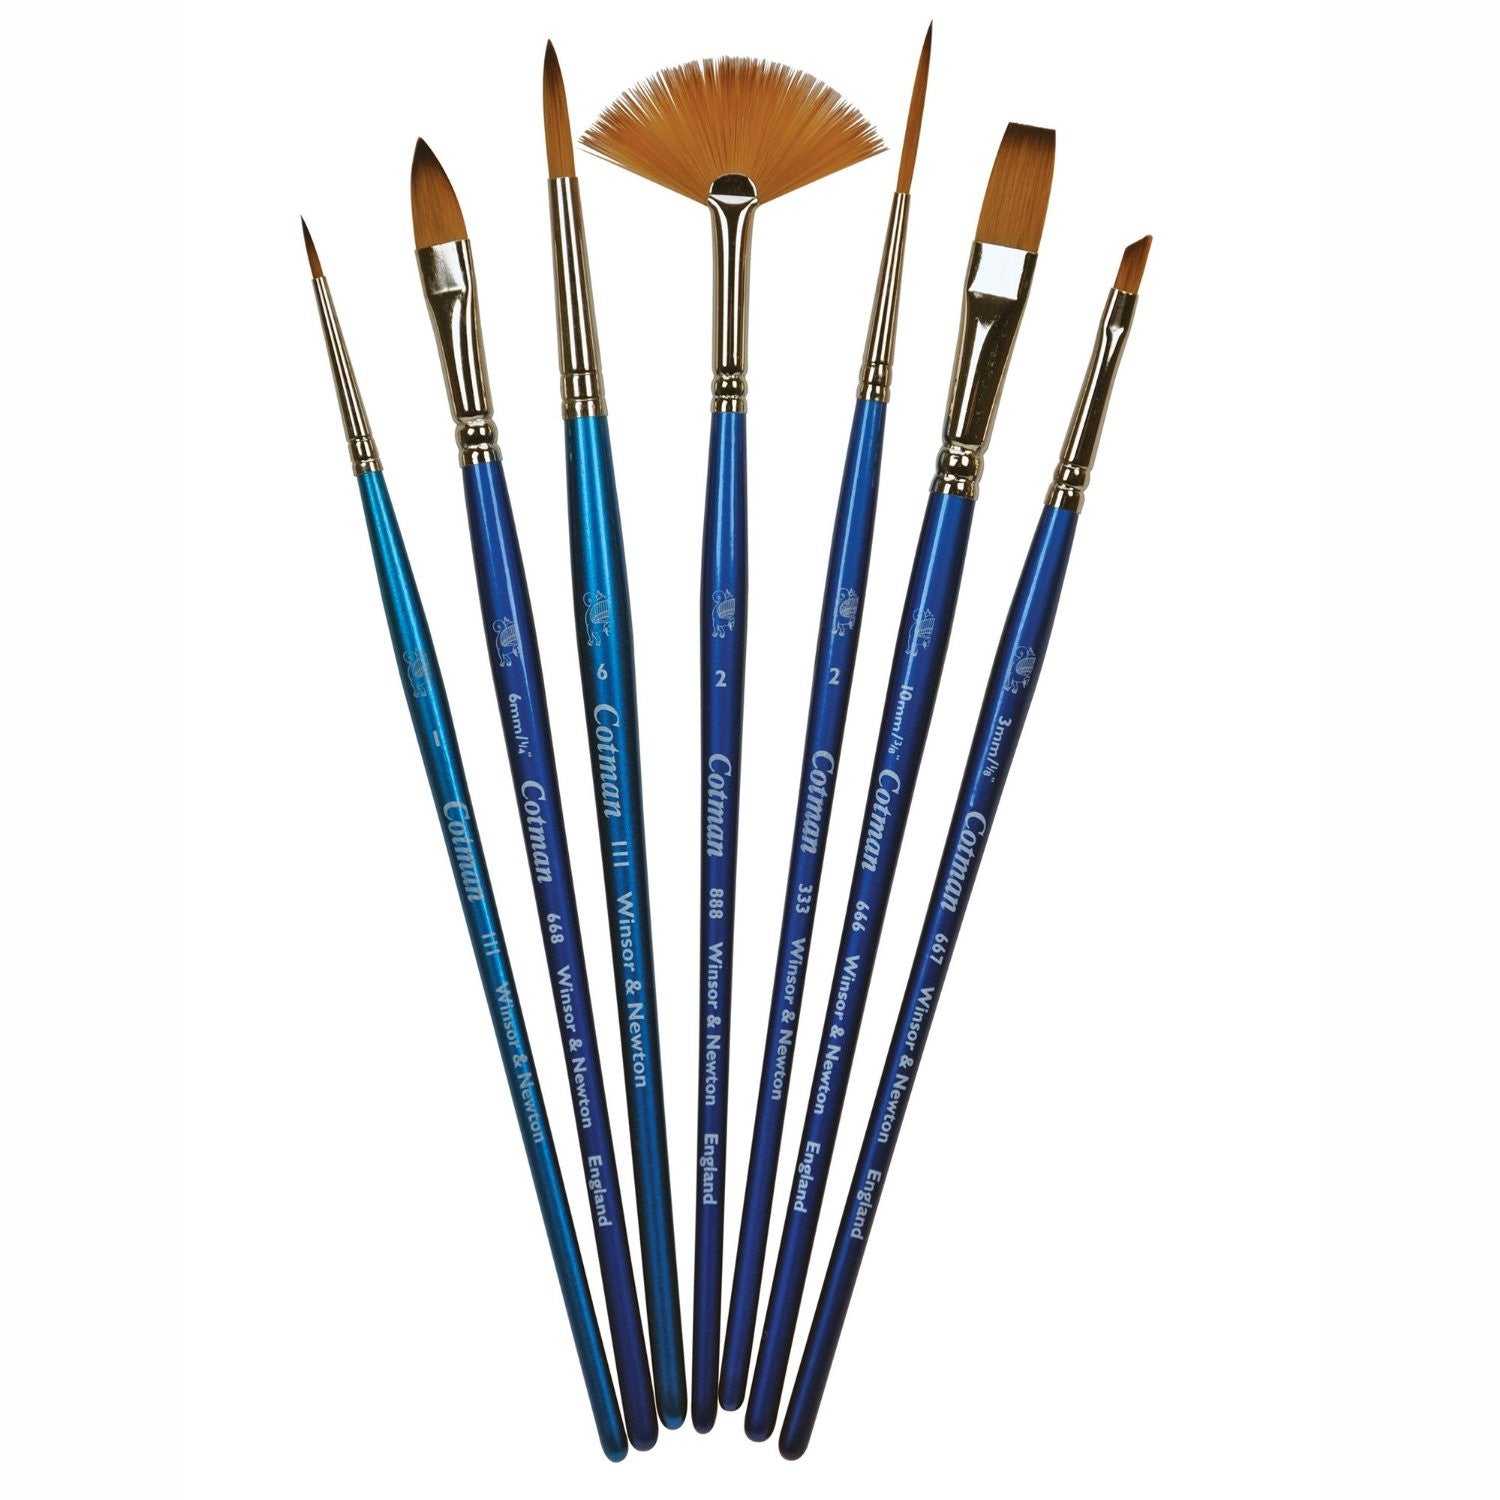 Winsor & Newton Cotman brush review and demo